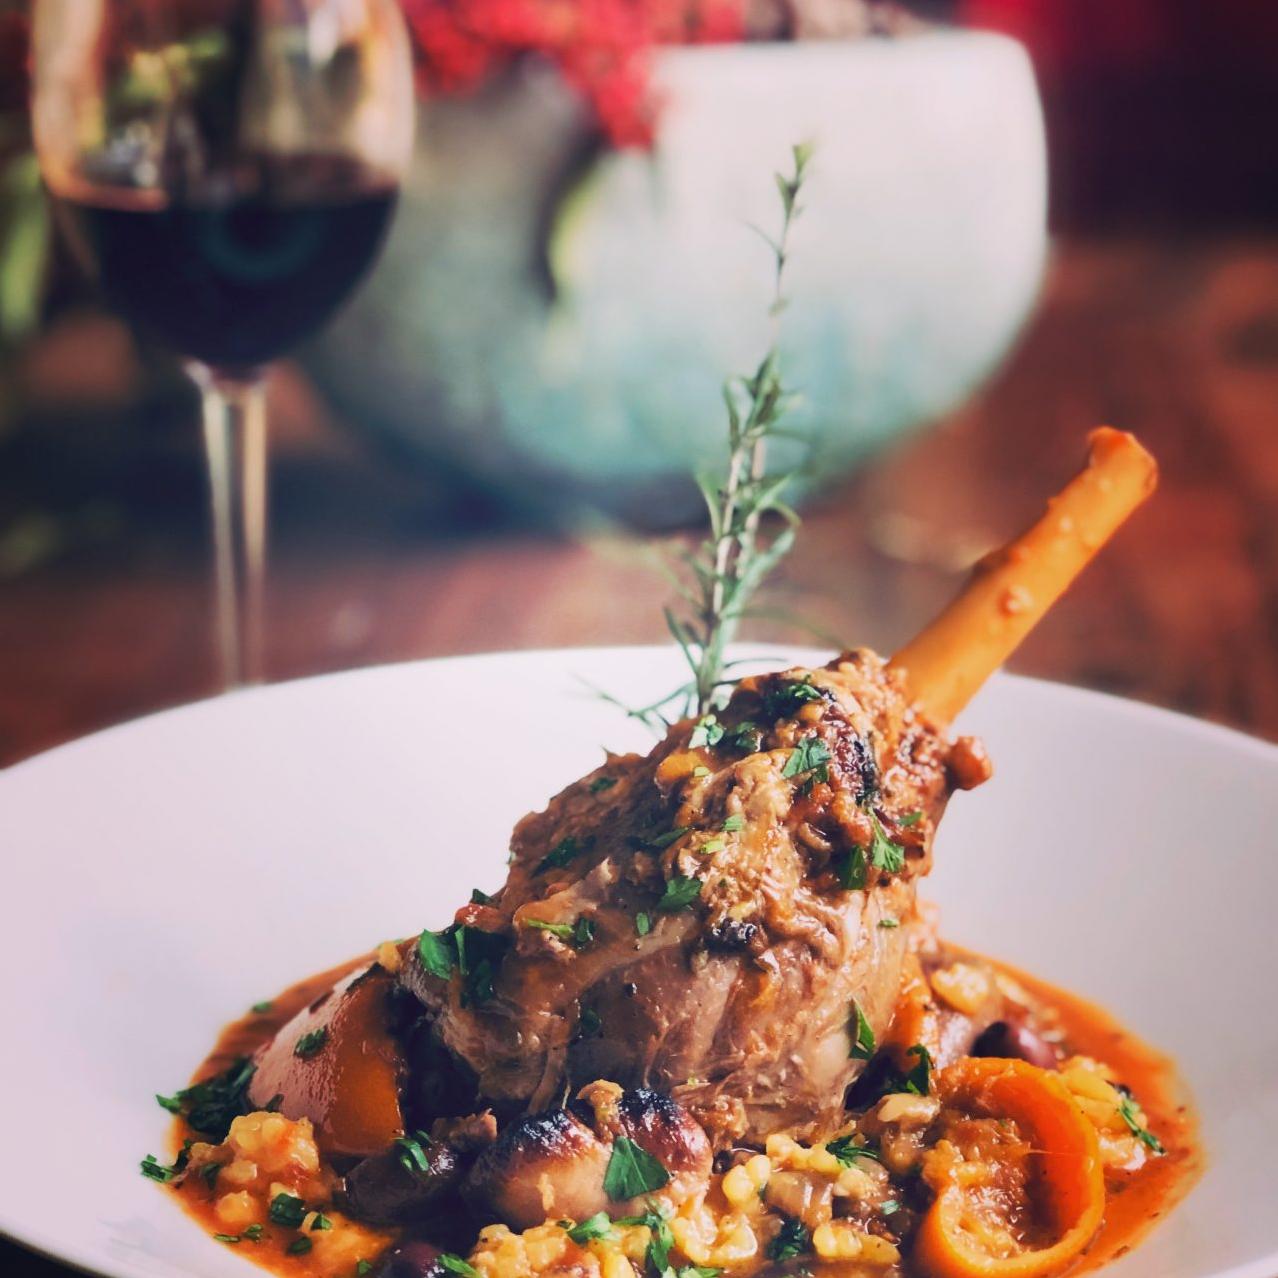  Savor the Mediterranean flavors of lamb shanks infused with wine and olives.